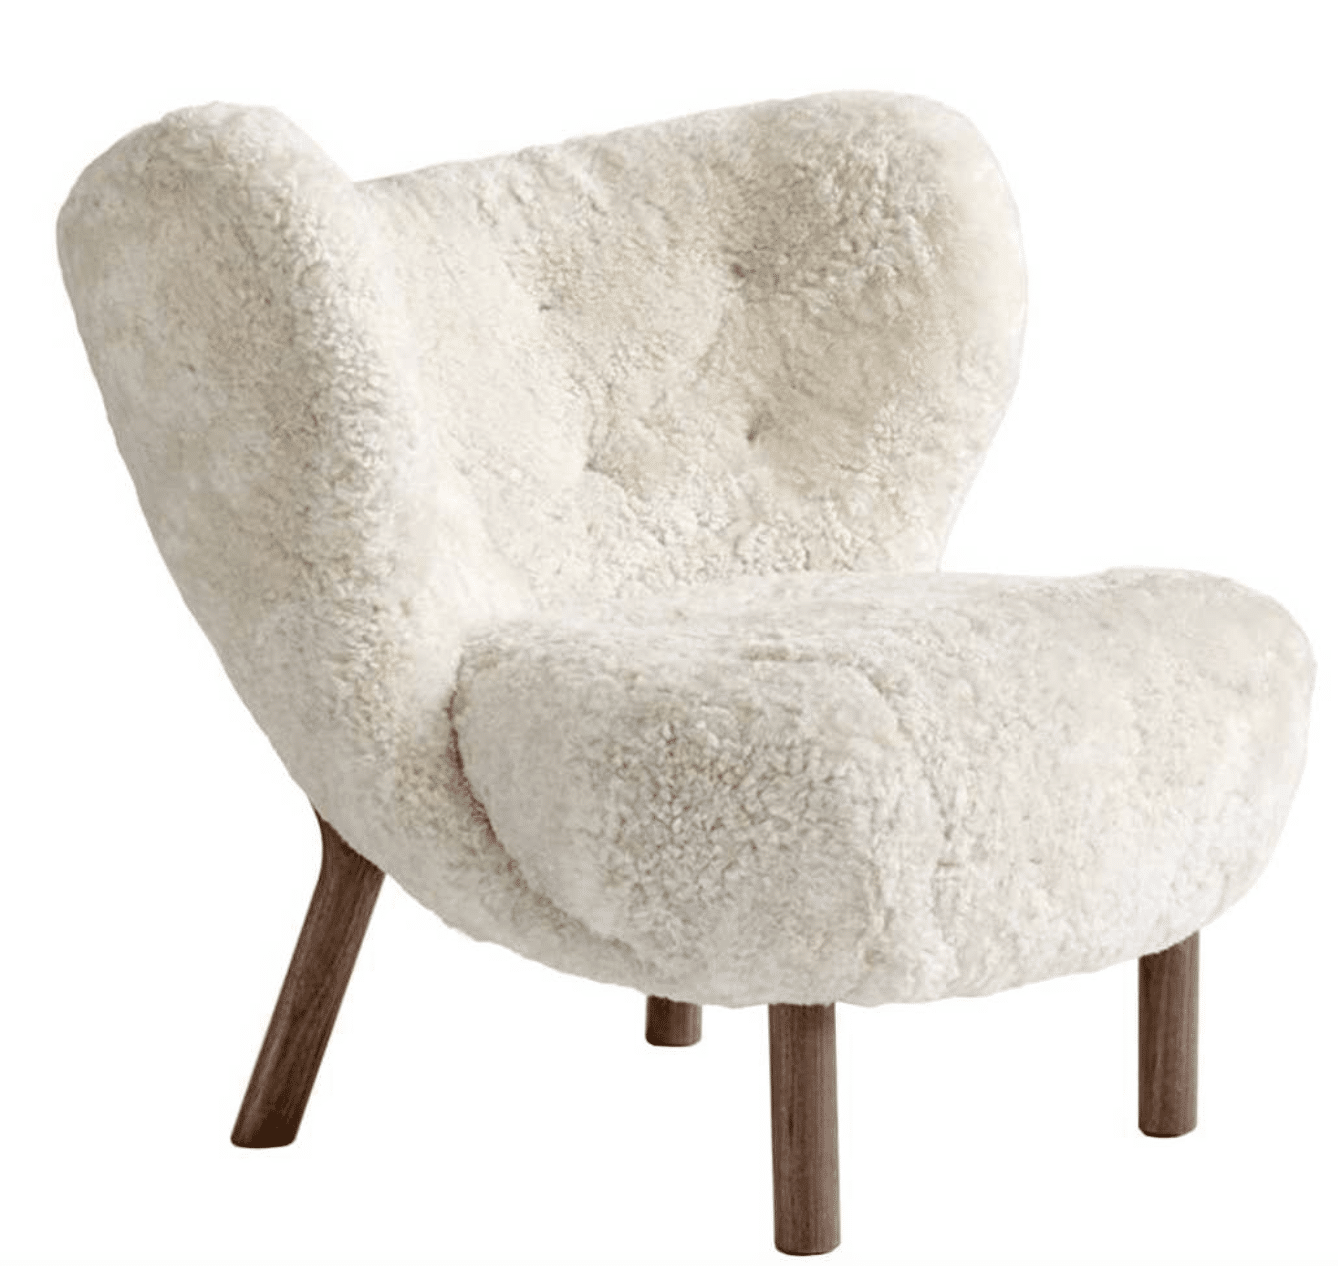 &TRADITION LITTLE PETRA VB1 FAUTEUIL